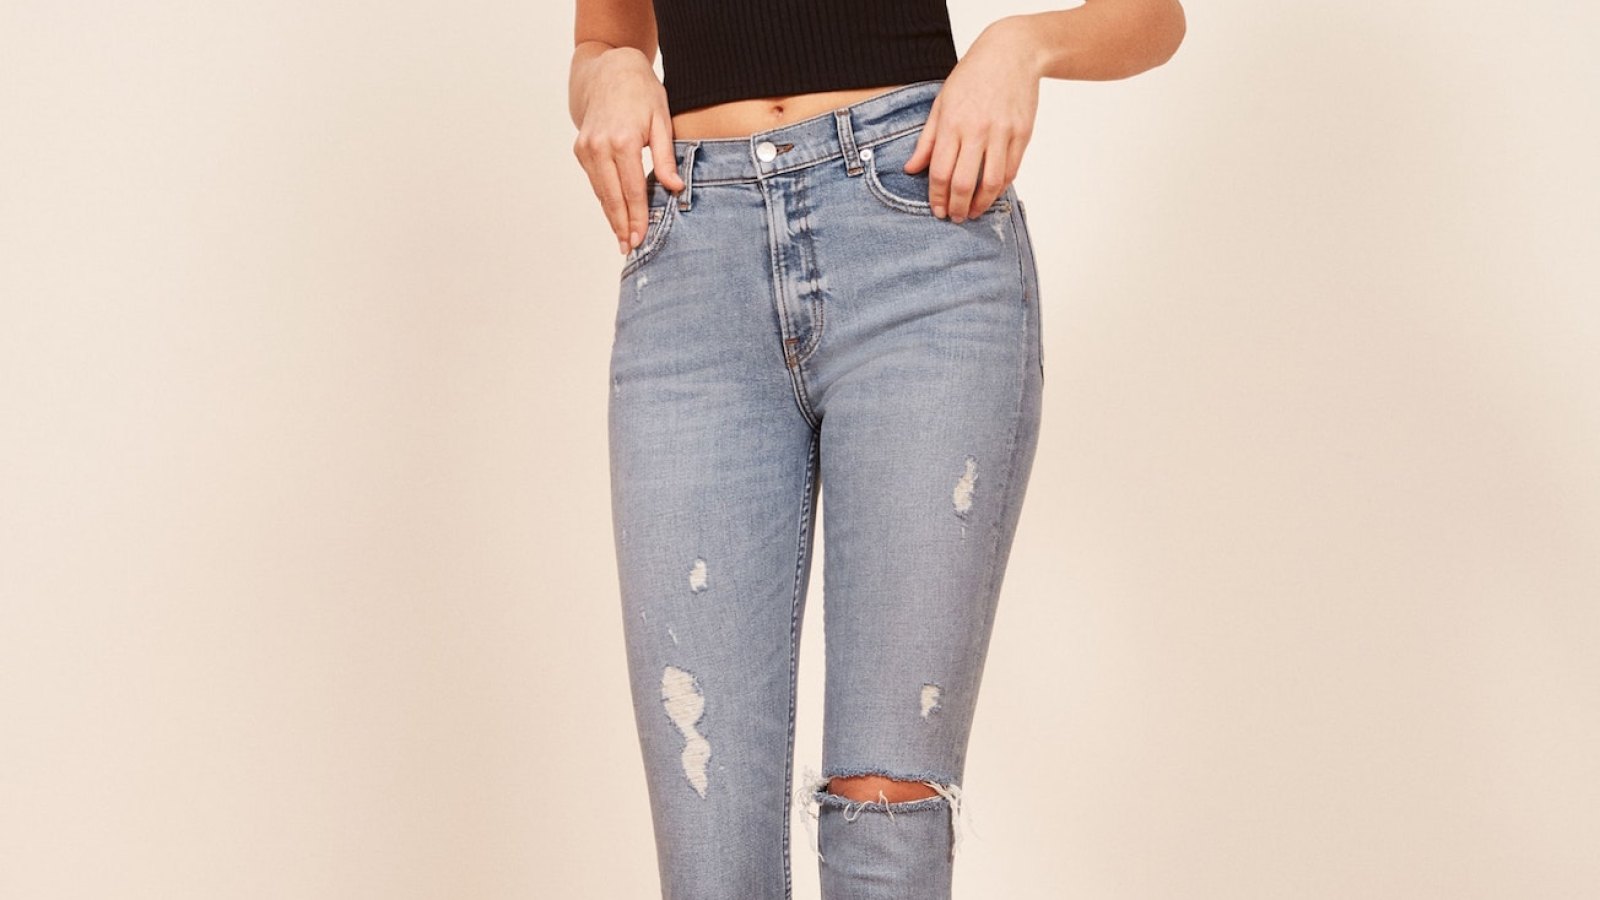 Reformation High & Skinny Jeans